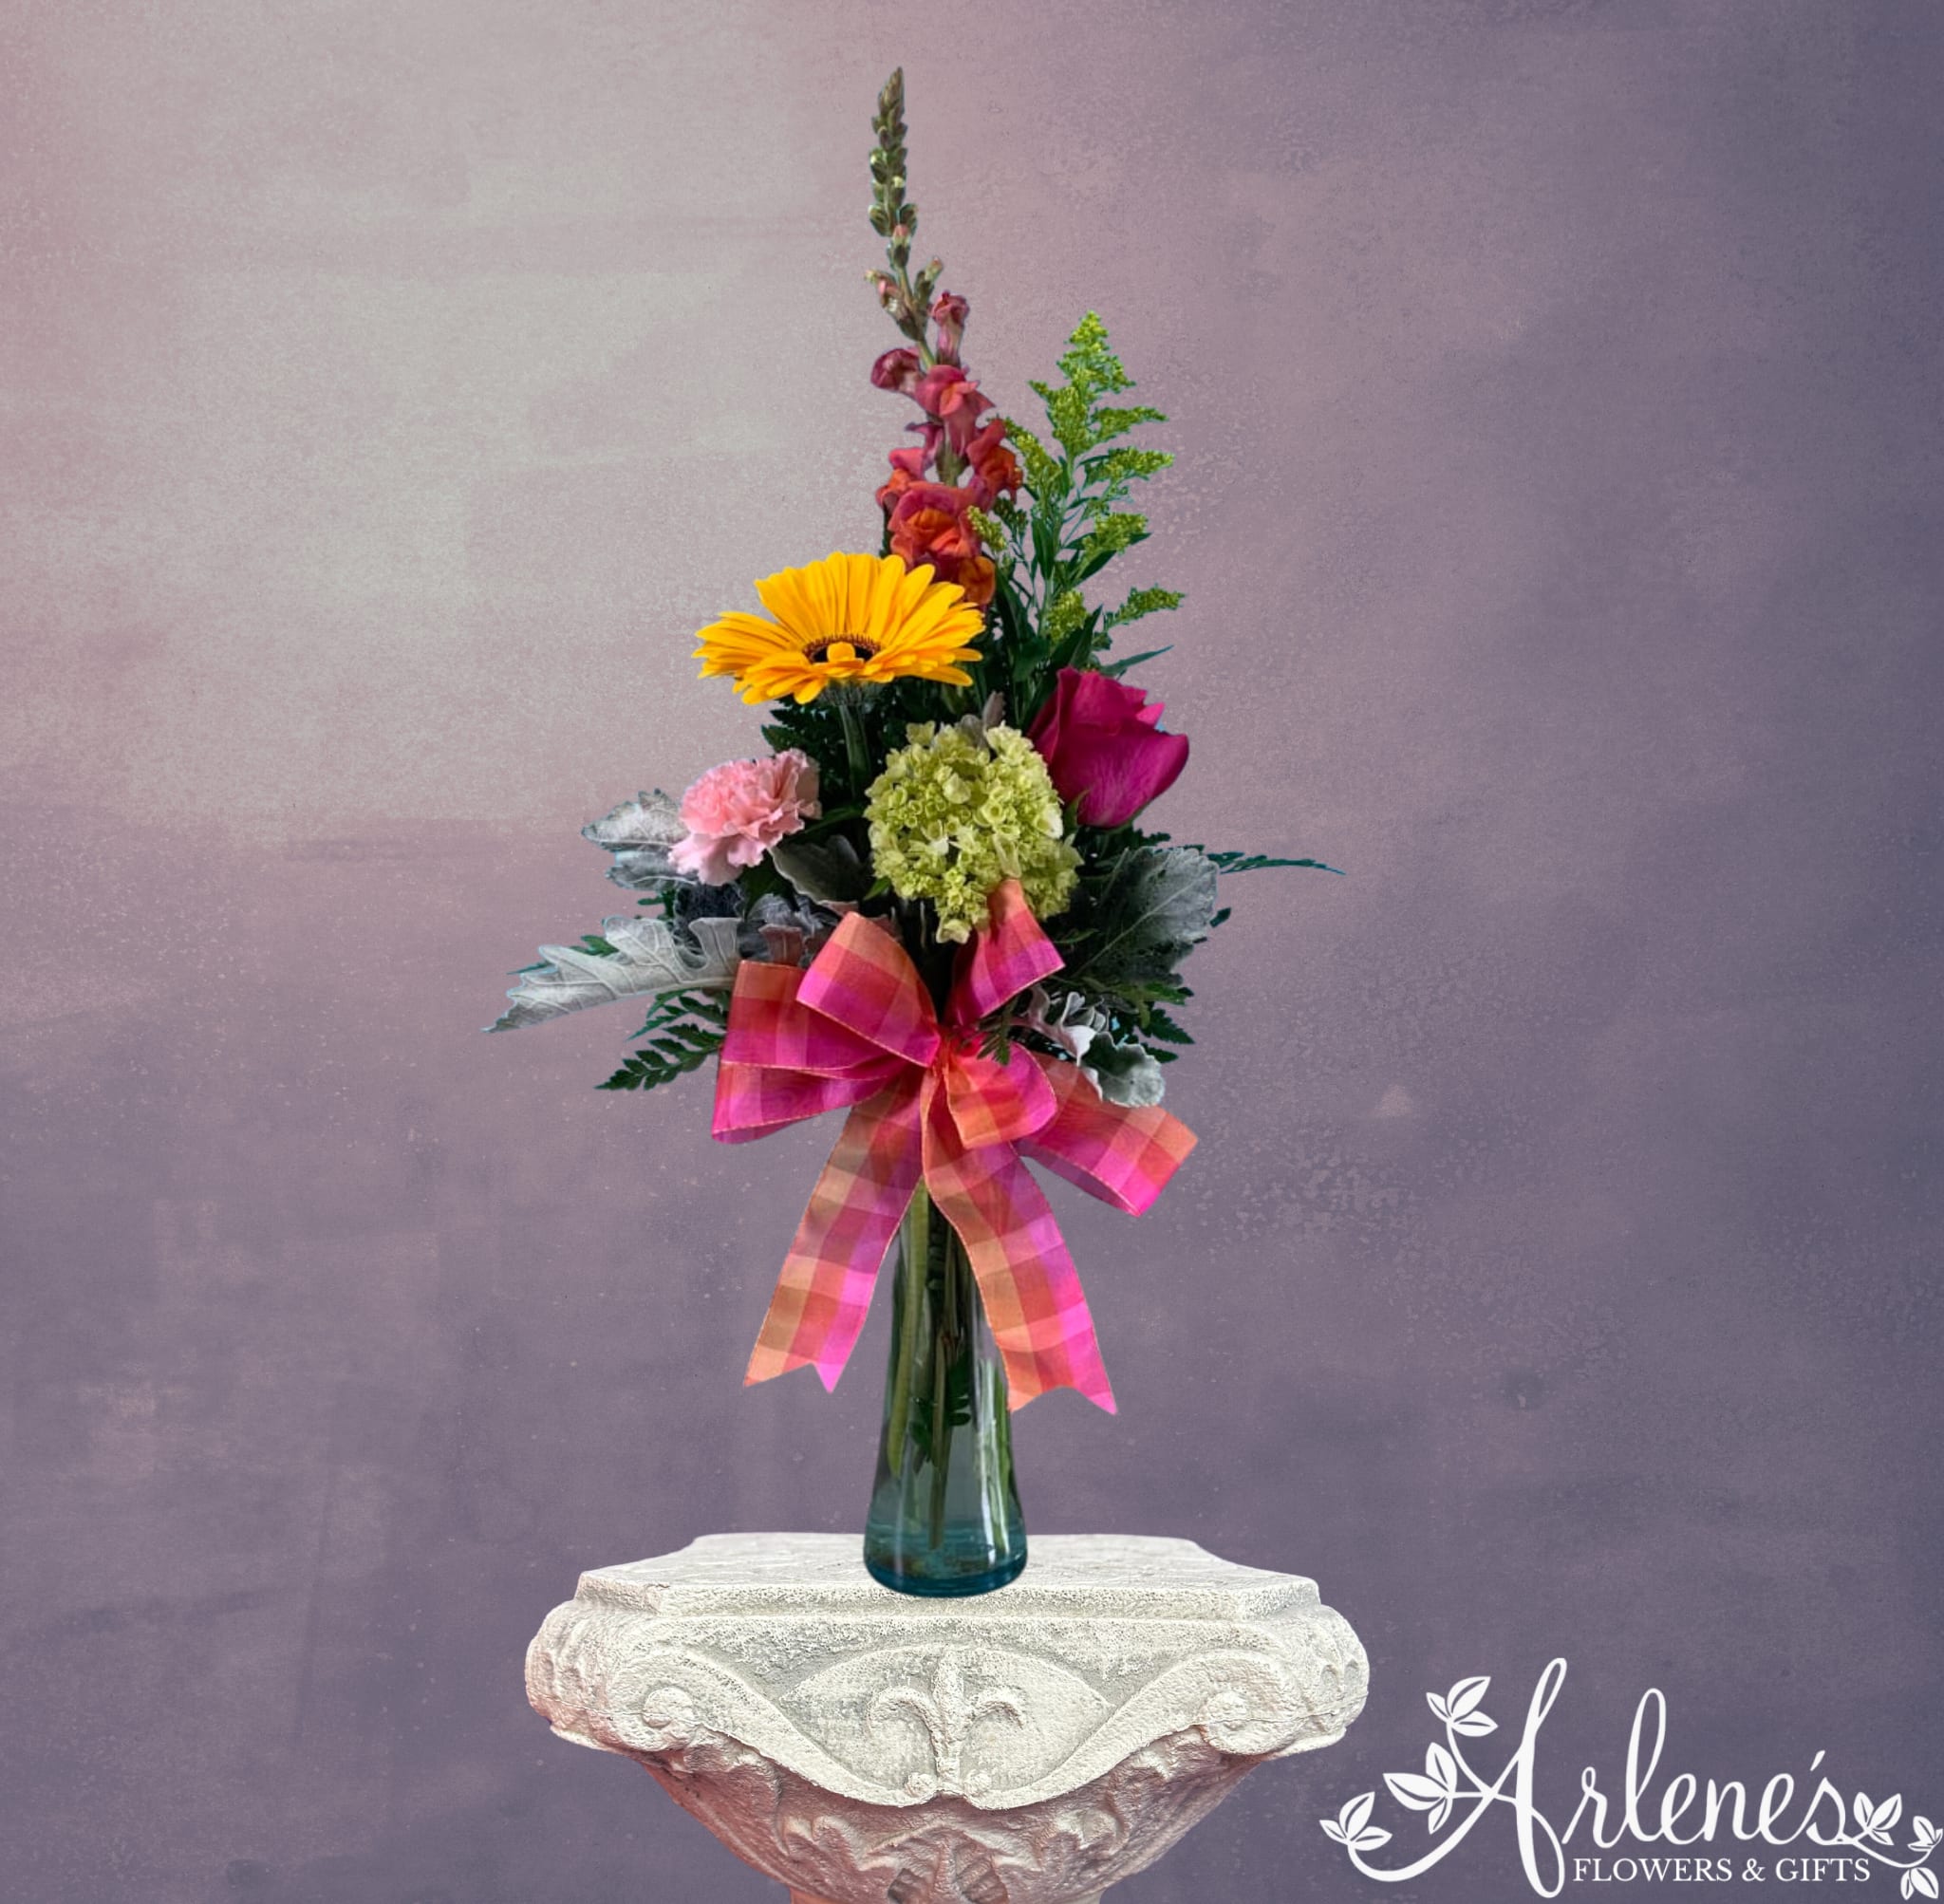 Token of Love - A sampler bouquet fit for that special mom in your life. This bouquet will have a small variety of spring stems paired with a colorful bow.